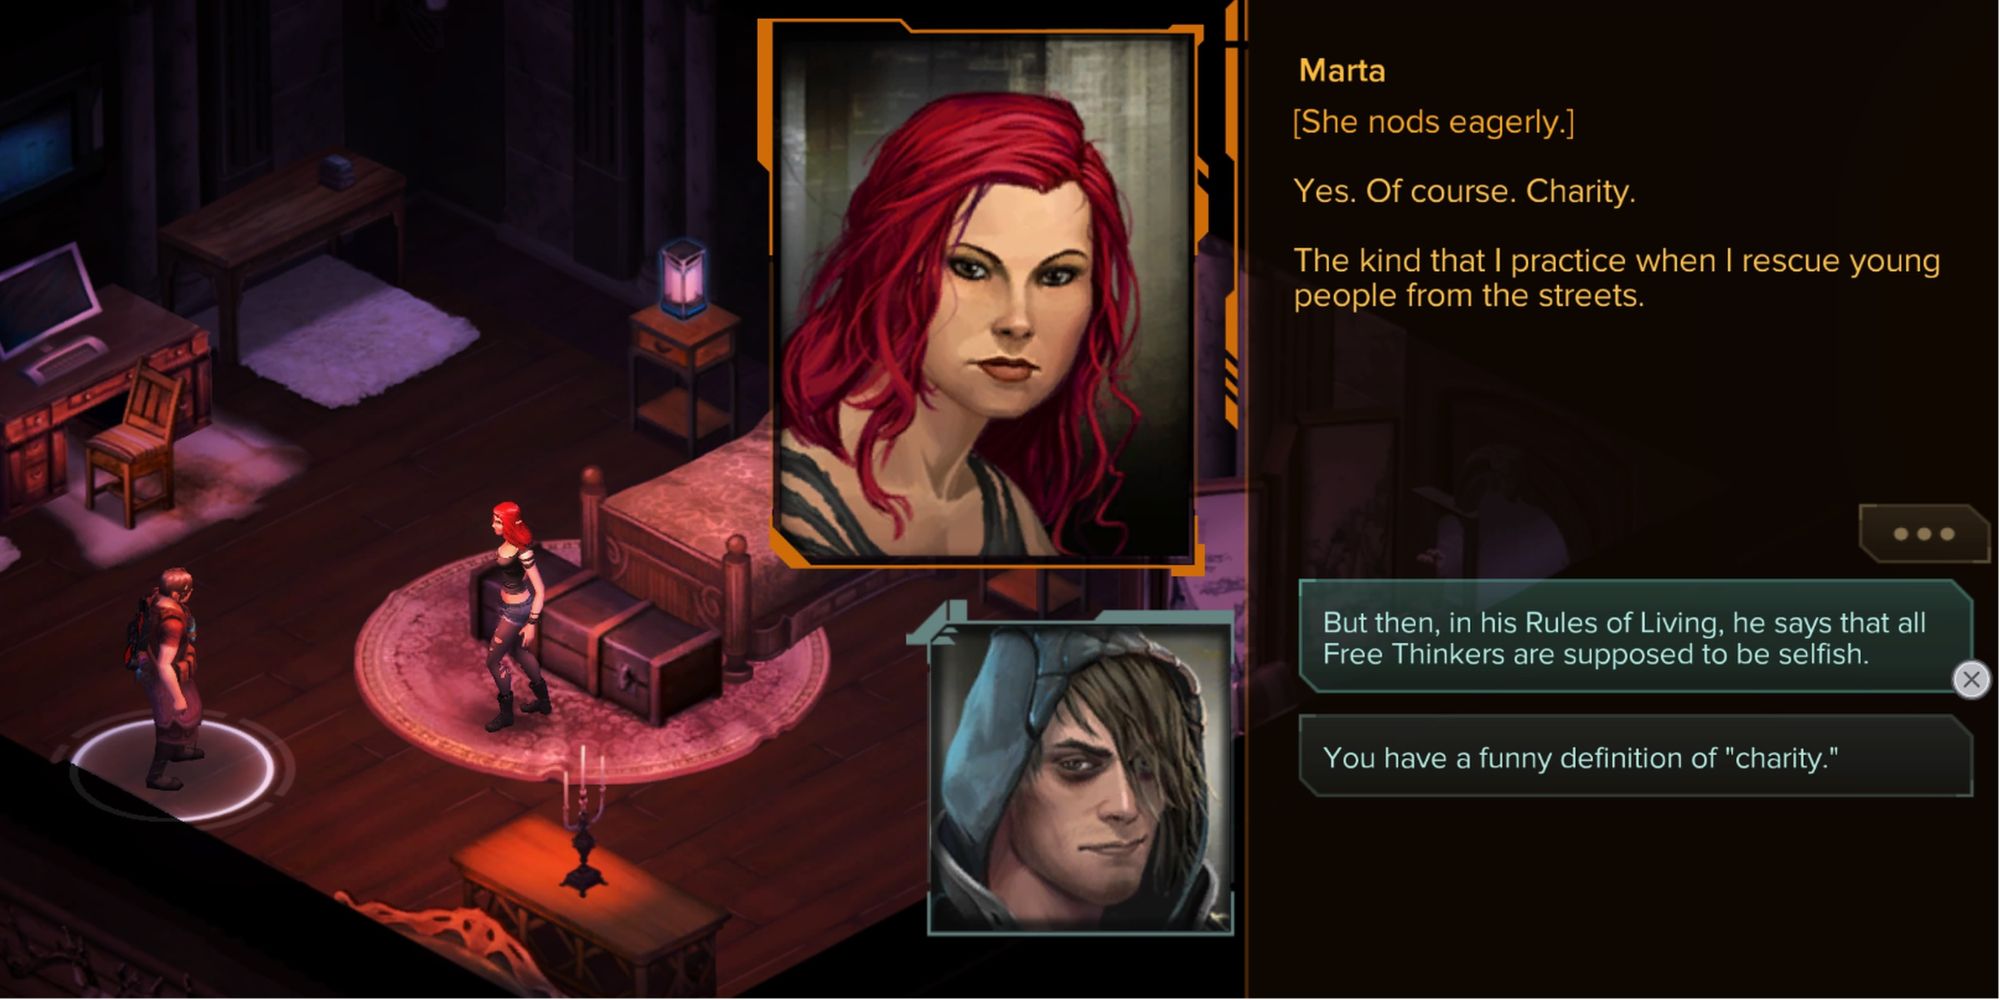 Shadowrun Dragonfall dialogue with Marta in Glory's mission